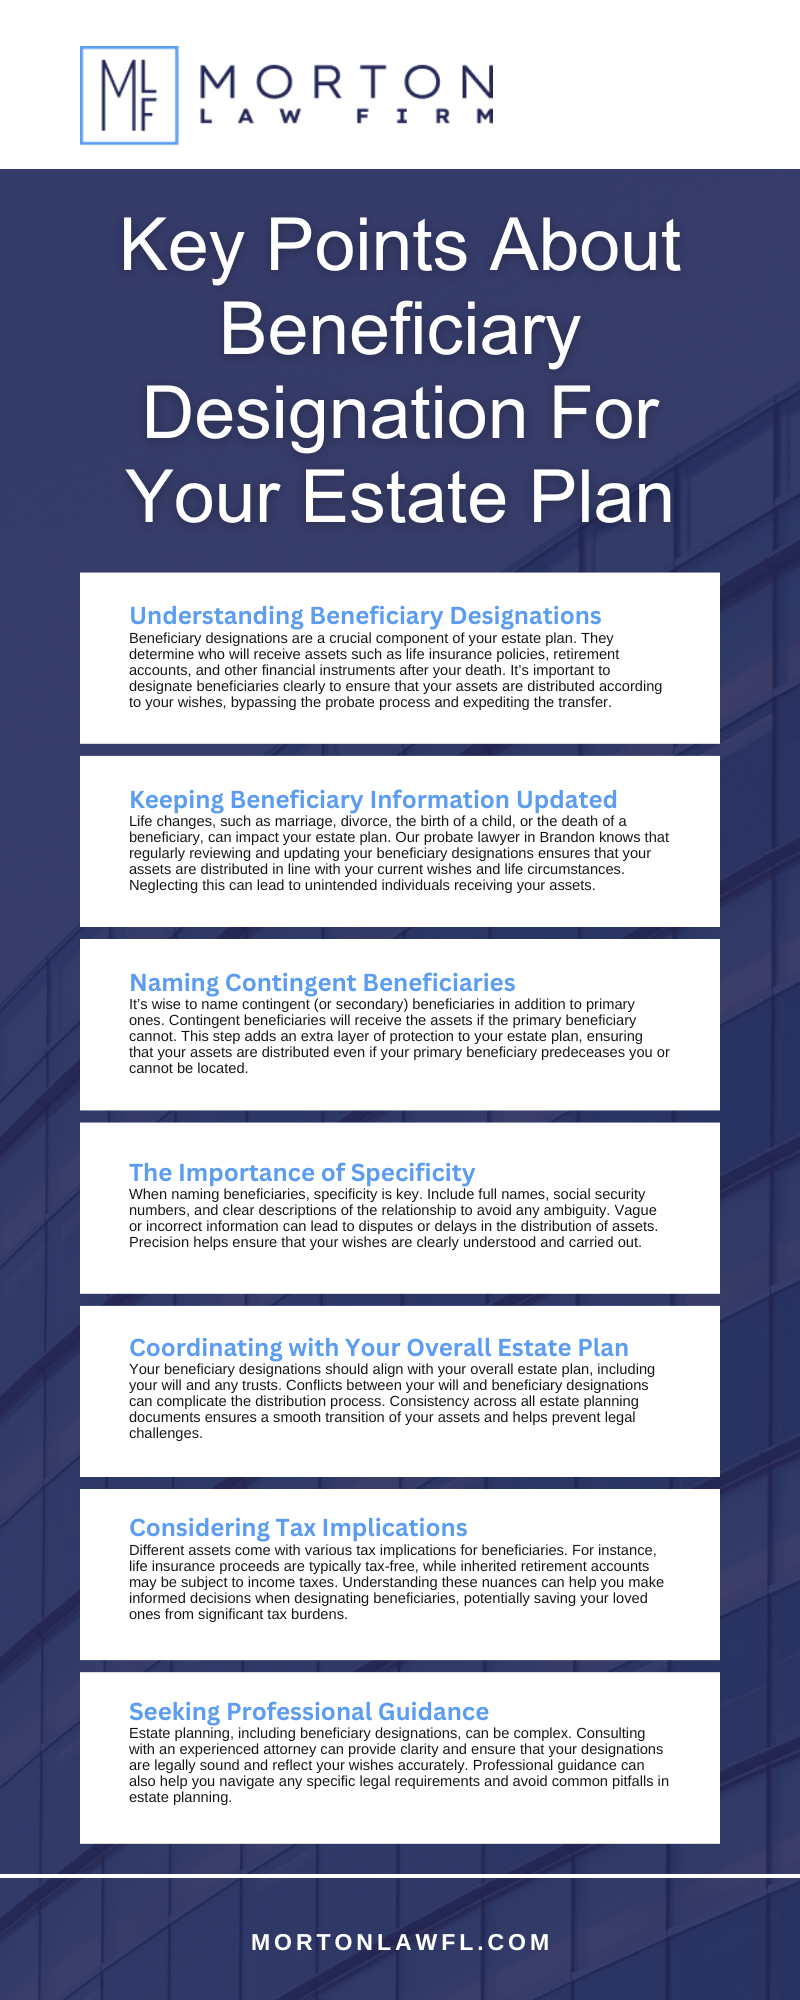 Key Points About Beneficiary Designation For Your Estate Plan Infographic